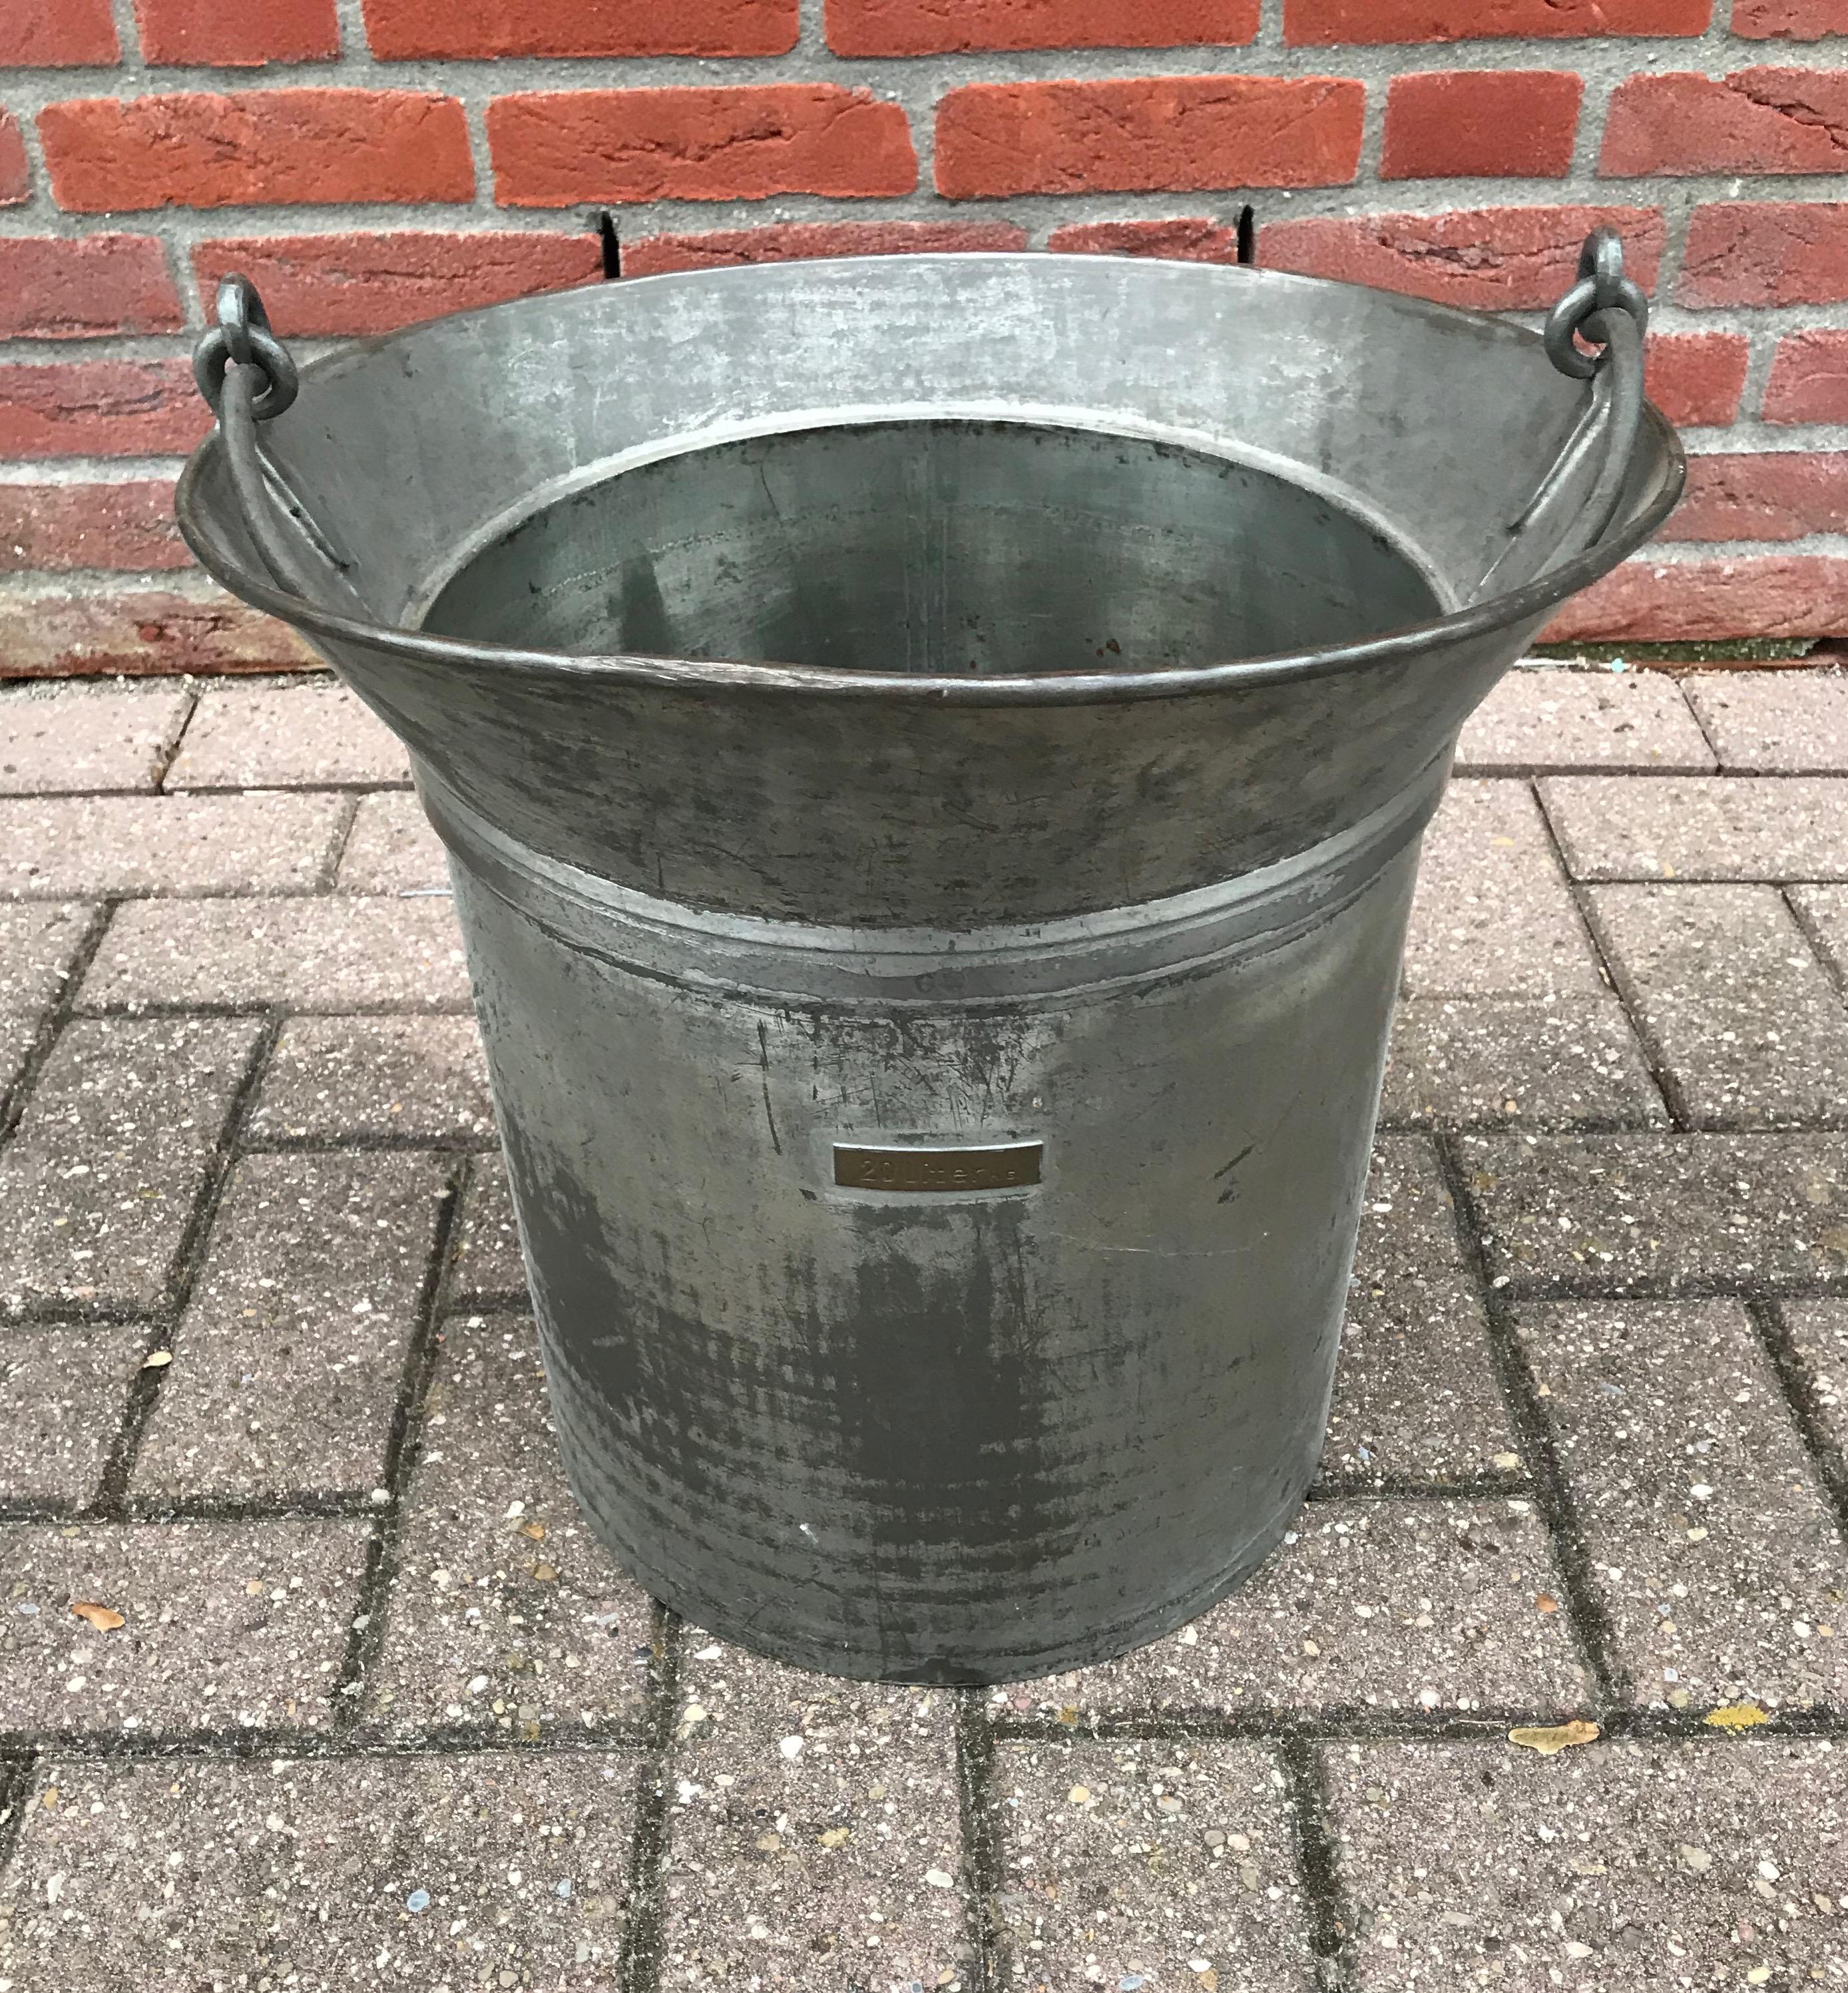 Stylish and decorative, early 1900s calibration bucket.

The wonderful shape and the Industrial color makes this hand-hammered wrought iron bucket with rivets highly attractive and decorative. Because of its great look, size, strength and durability